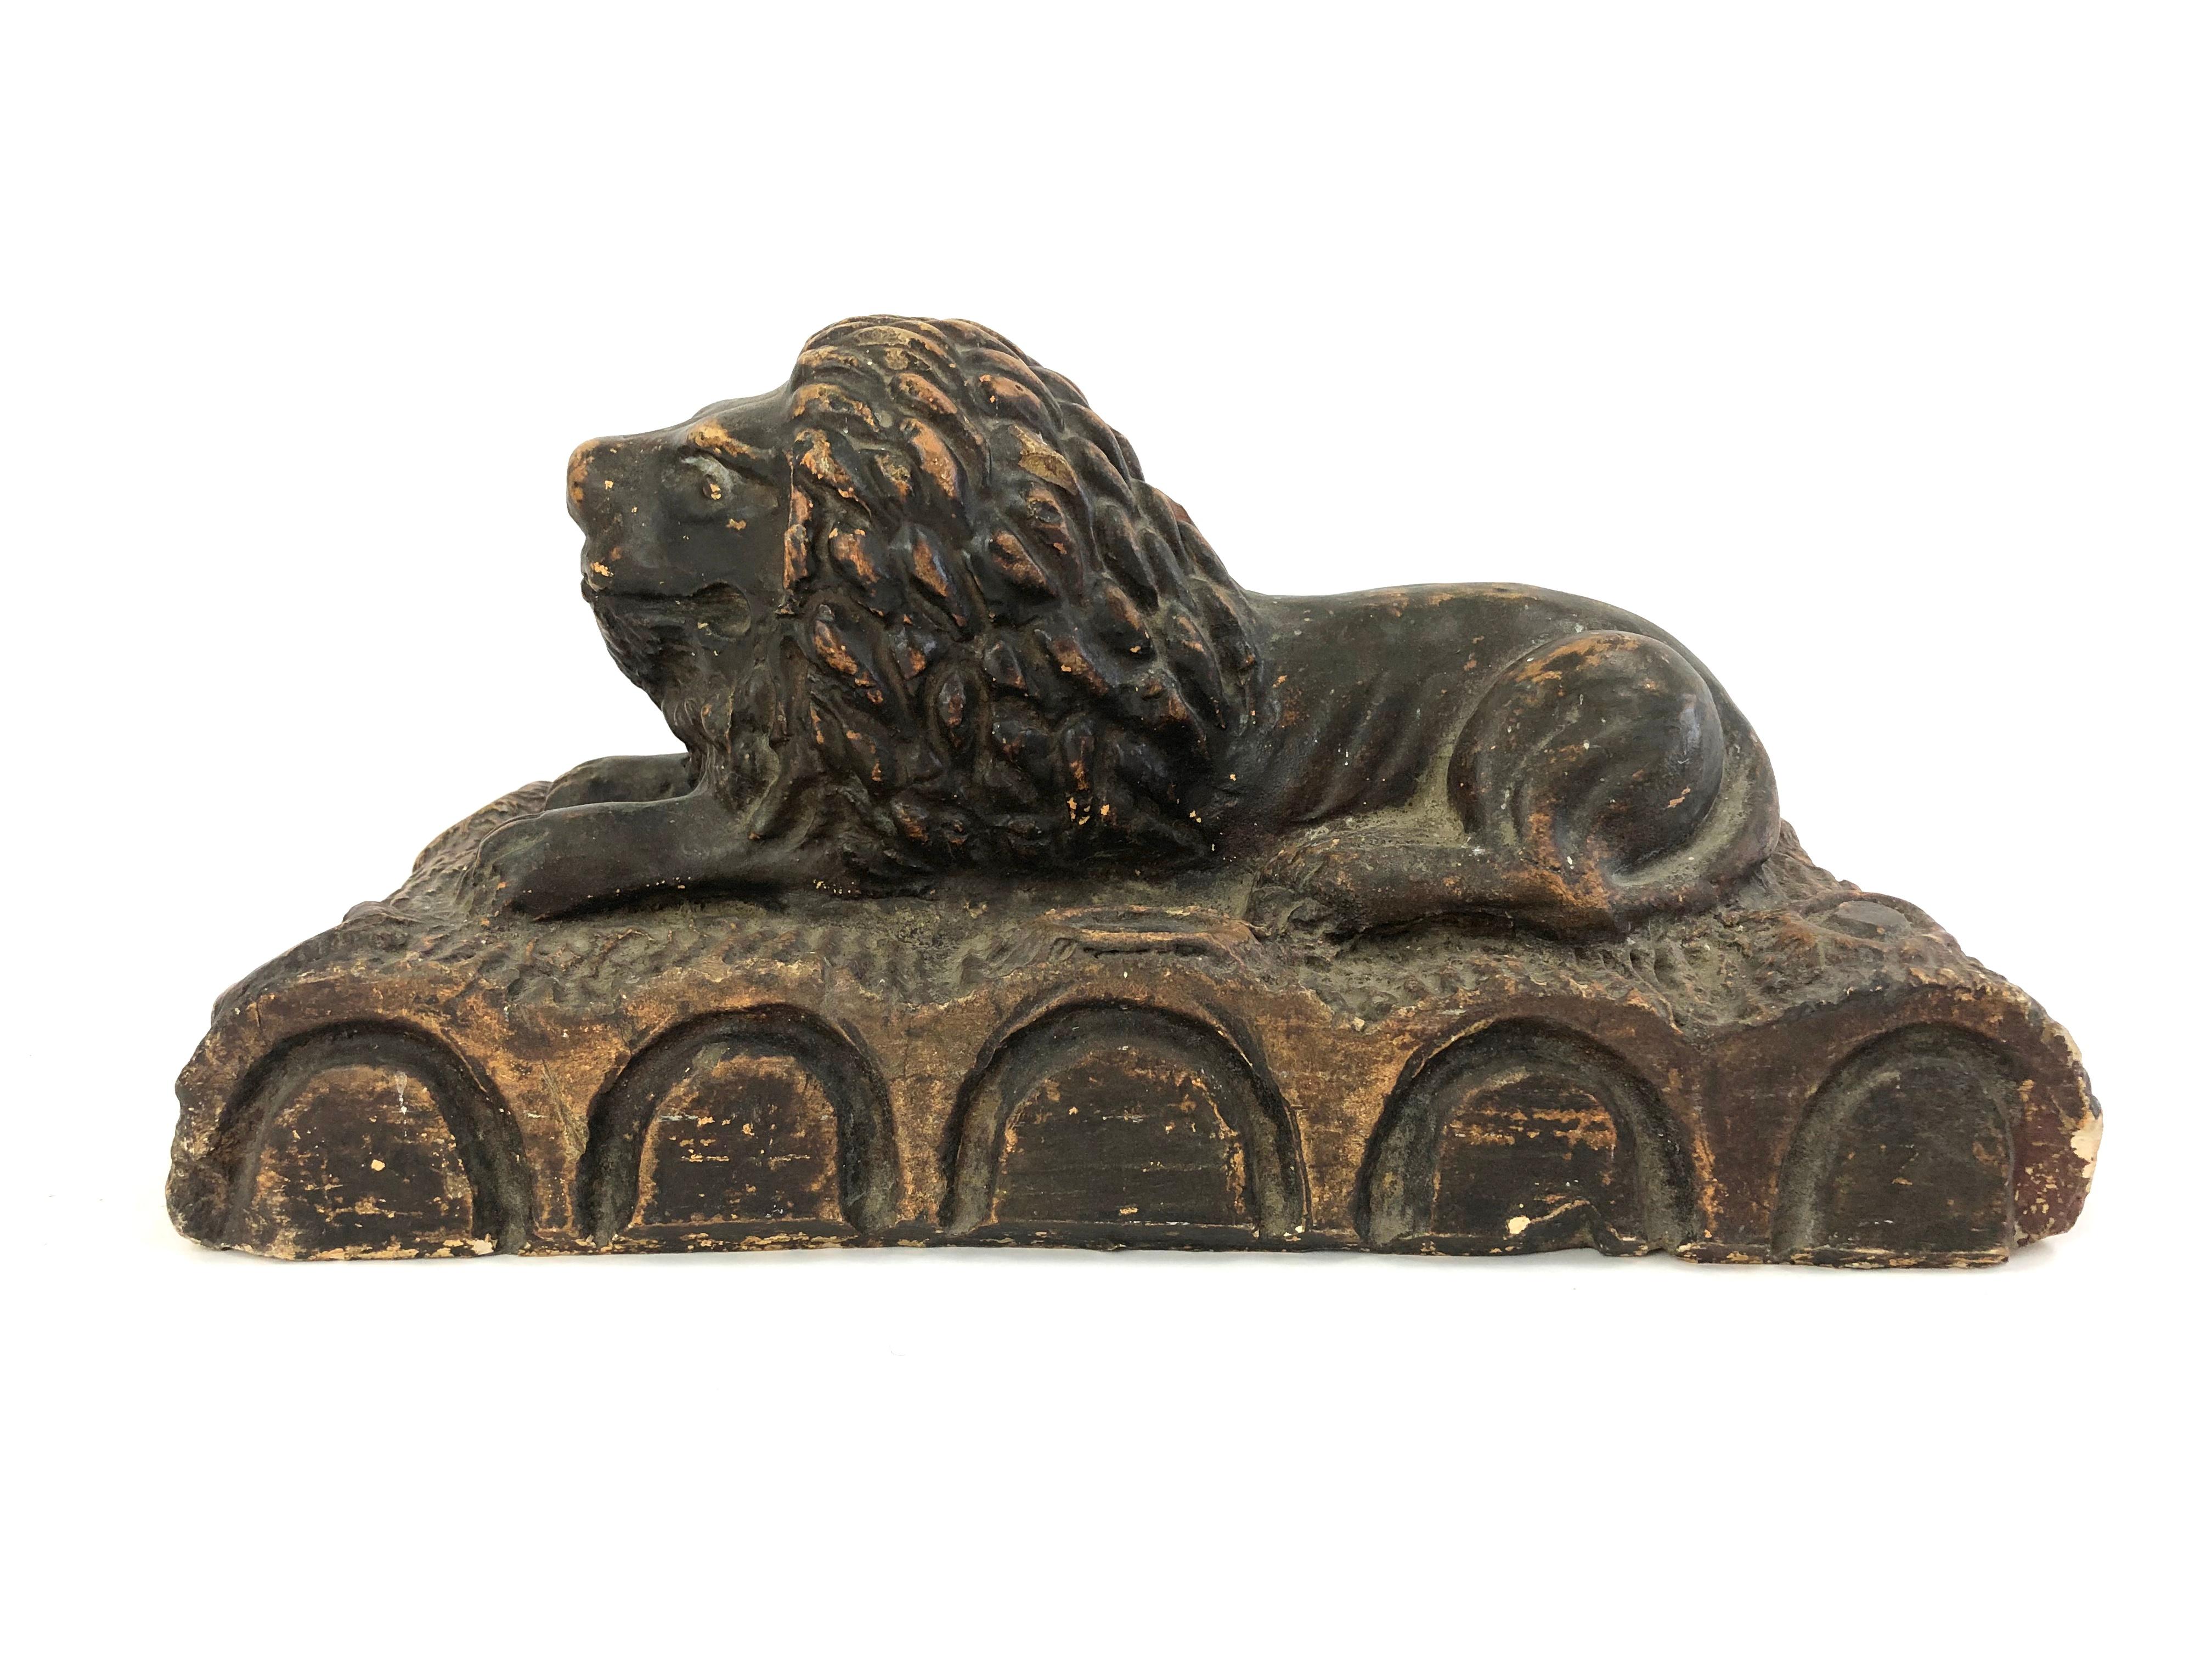 A 19th century Folk Art pottery sculpture of a recumbent, regal lion, resting on a row of boldly modeled logs. Wonderful scale and character.